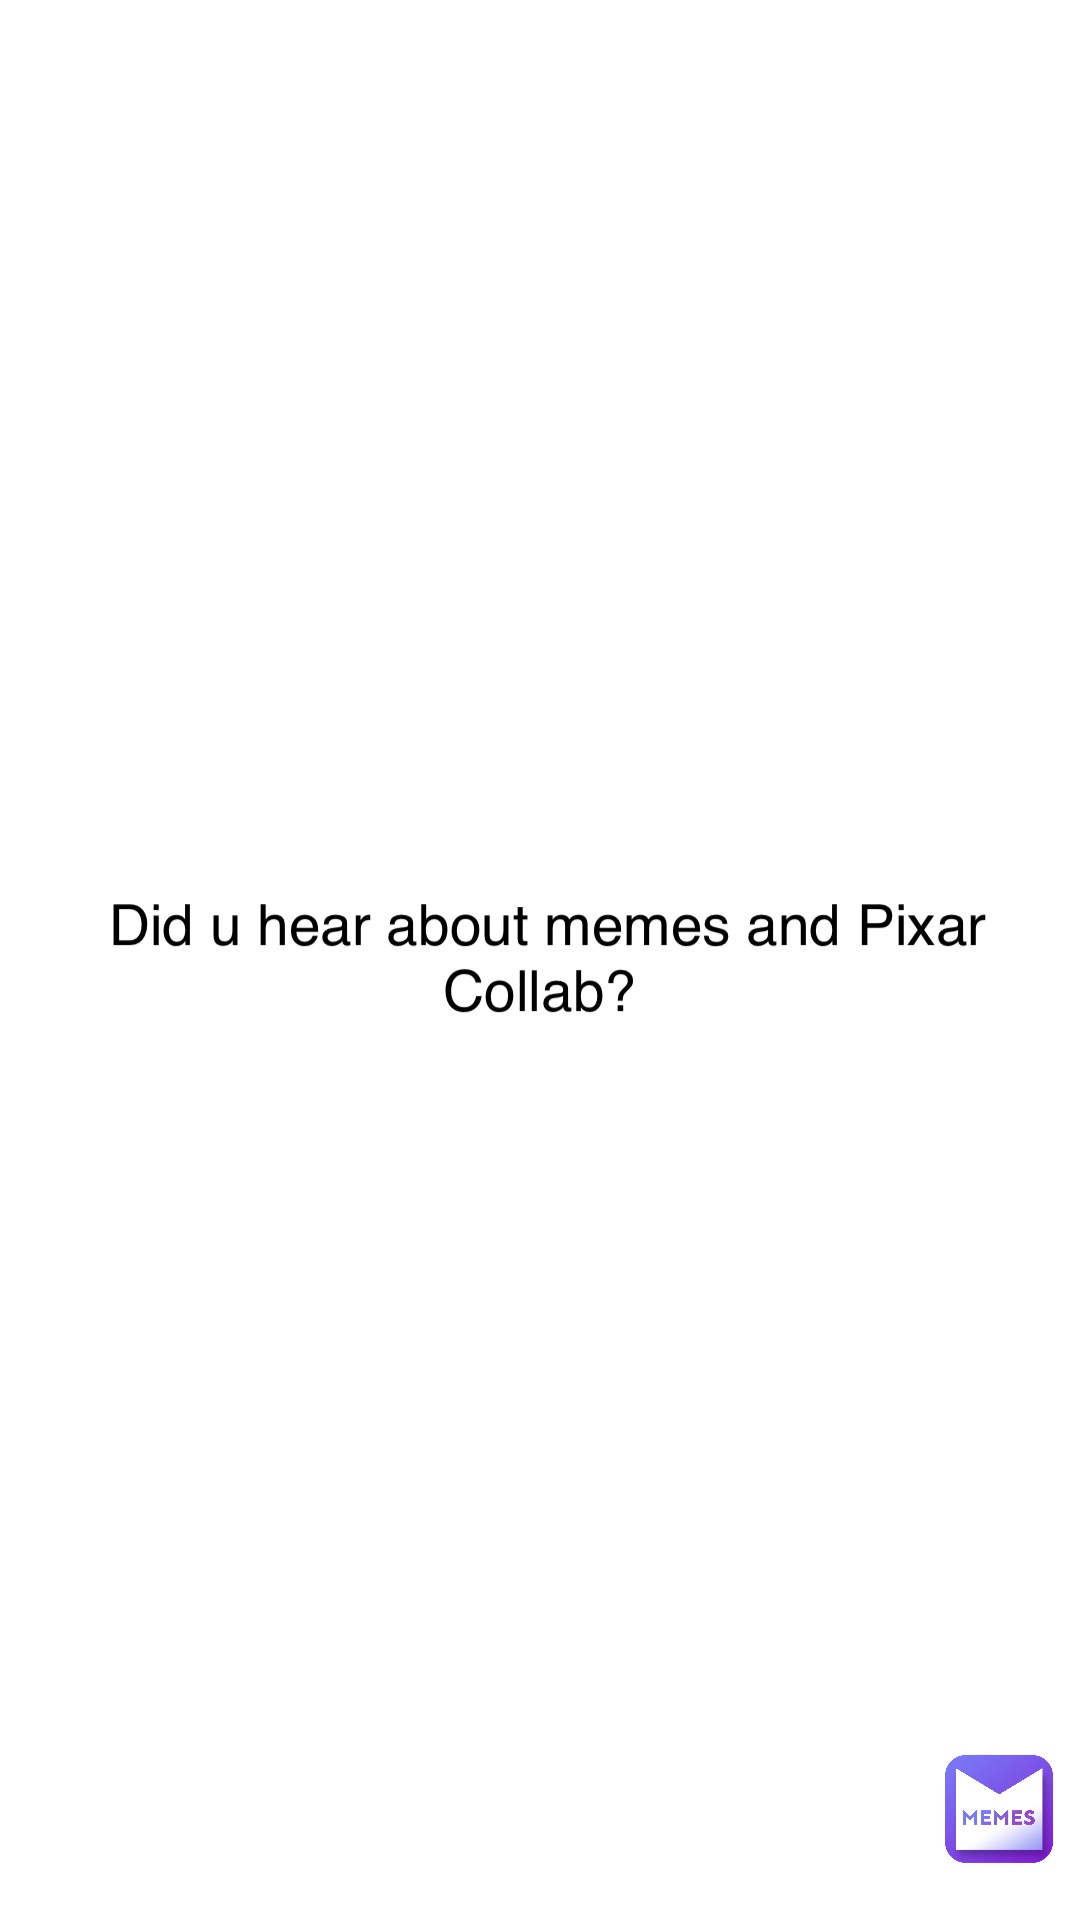 Did u hear about memes and Pixar Collab?